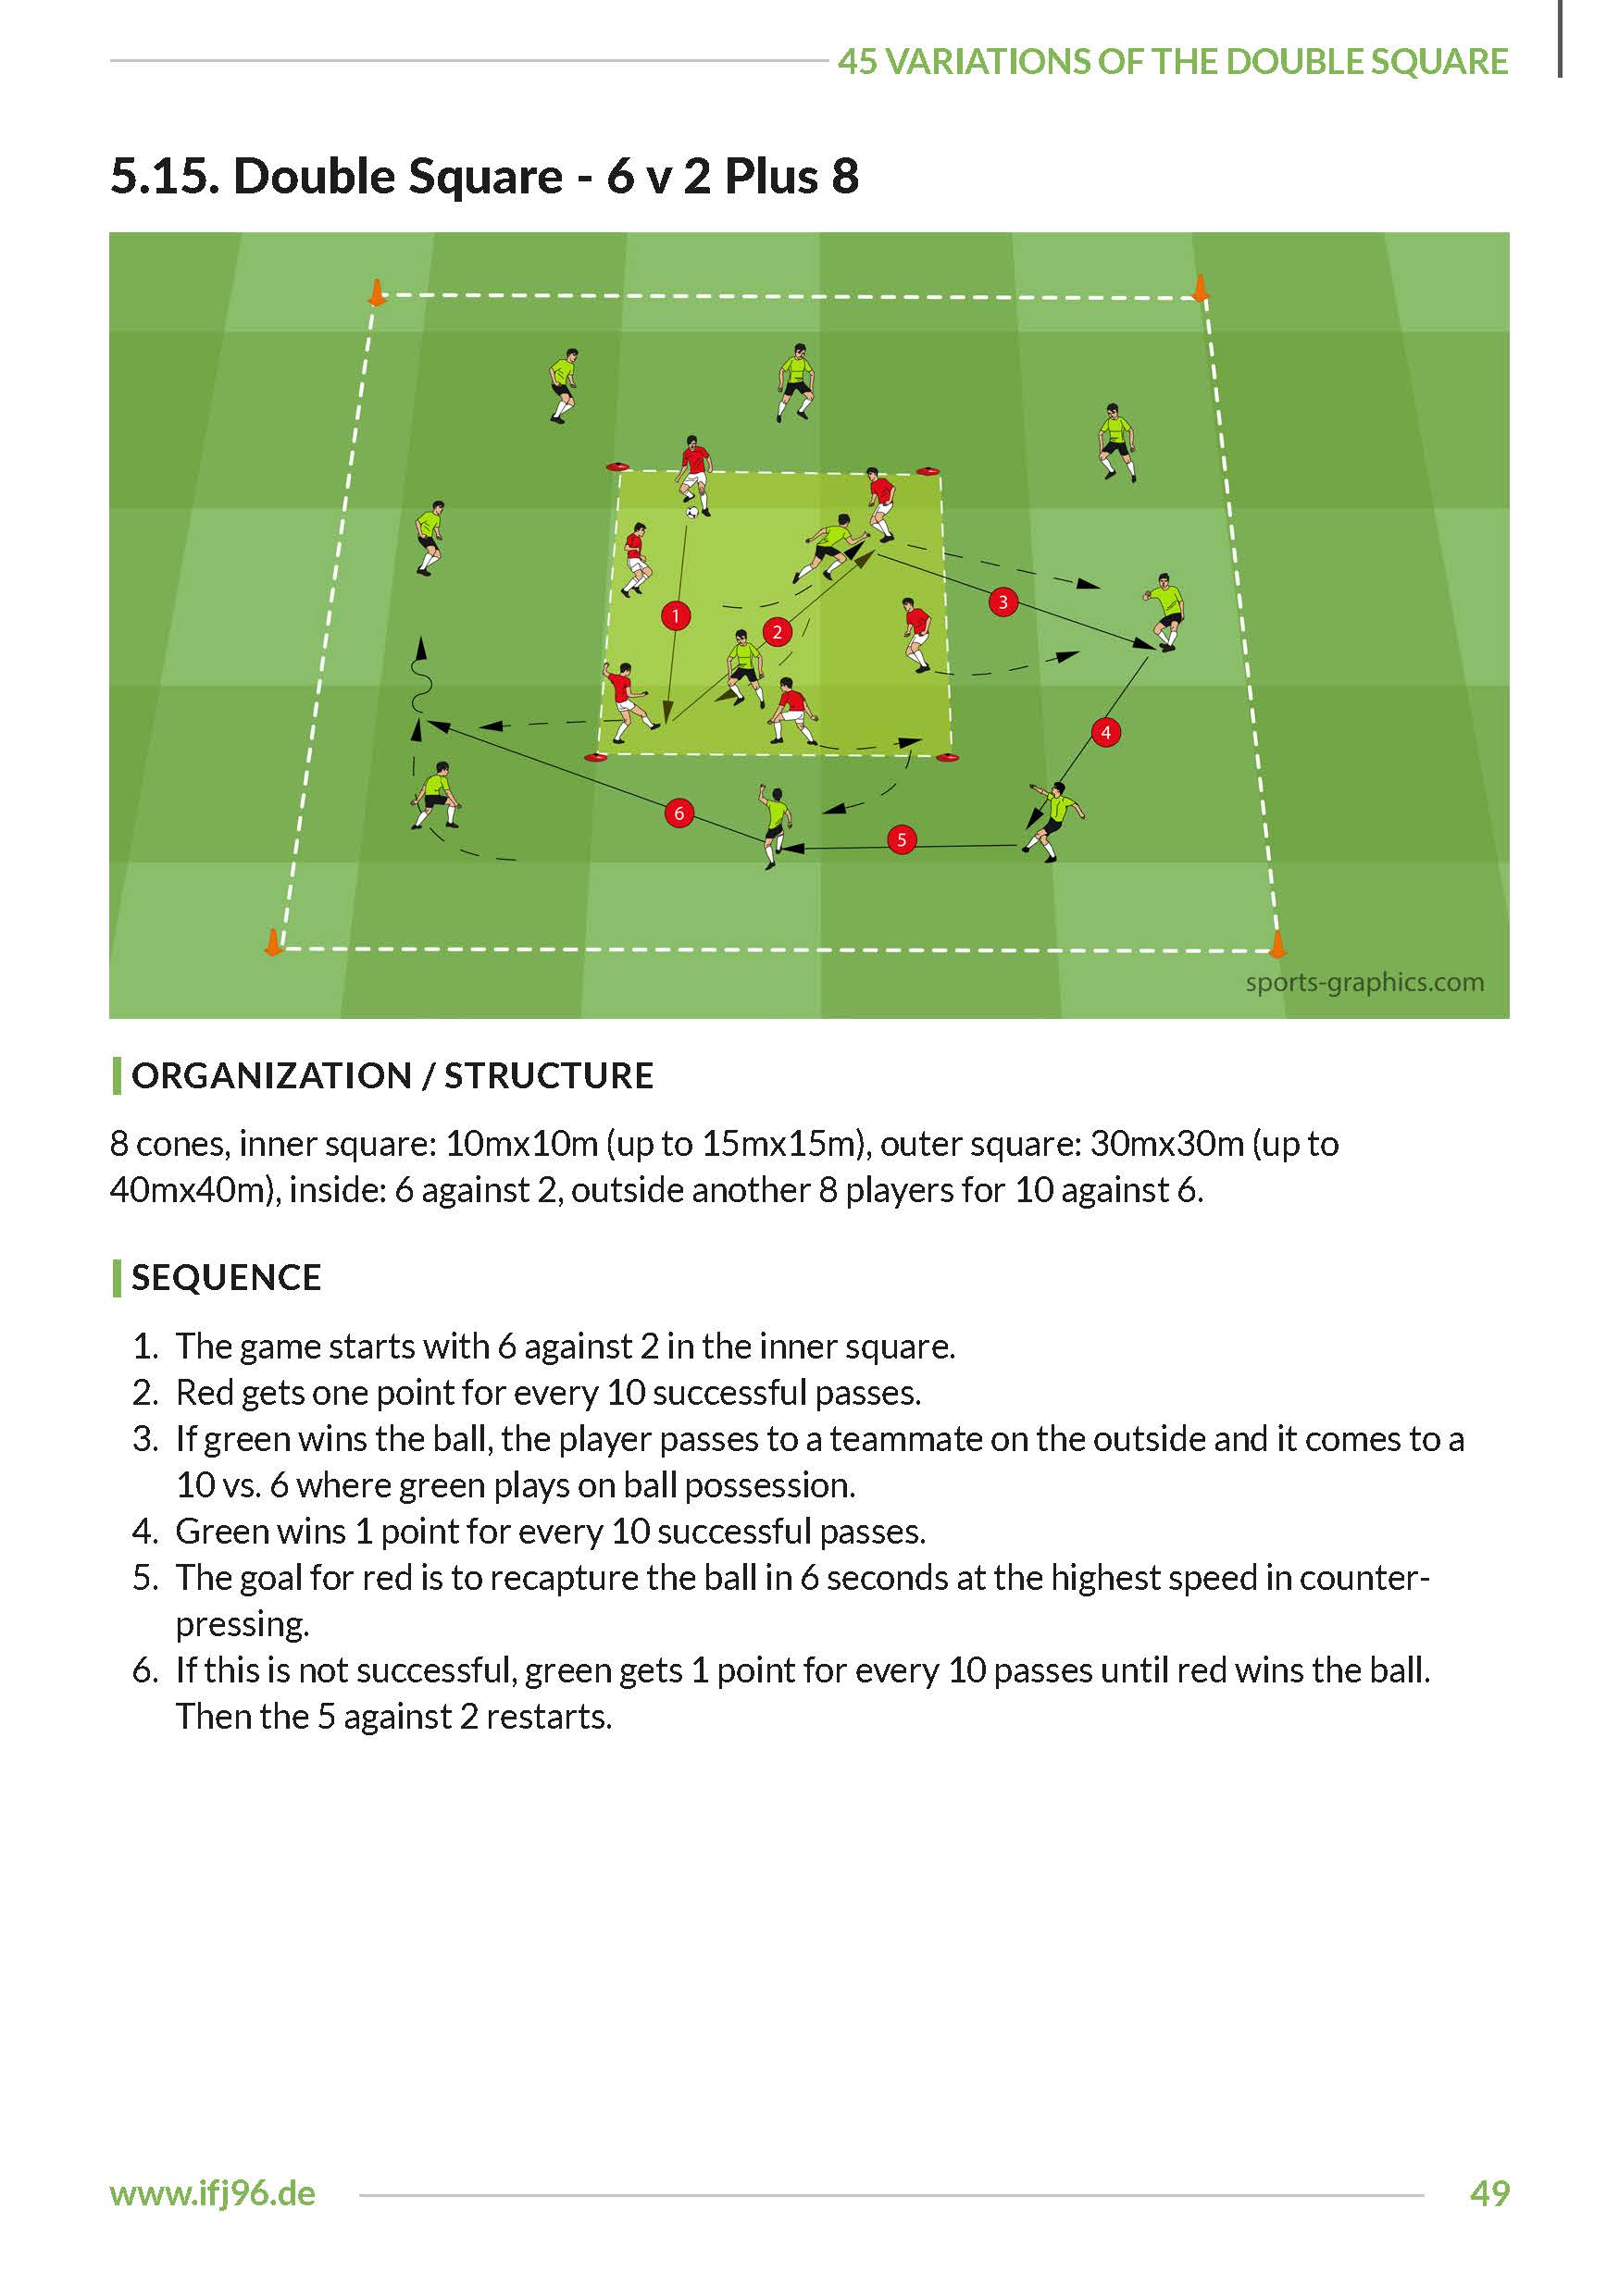 Tiqui Taca - One Touch - 45 Variations of the Double Square (eBook)